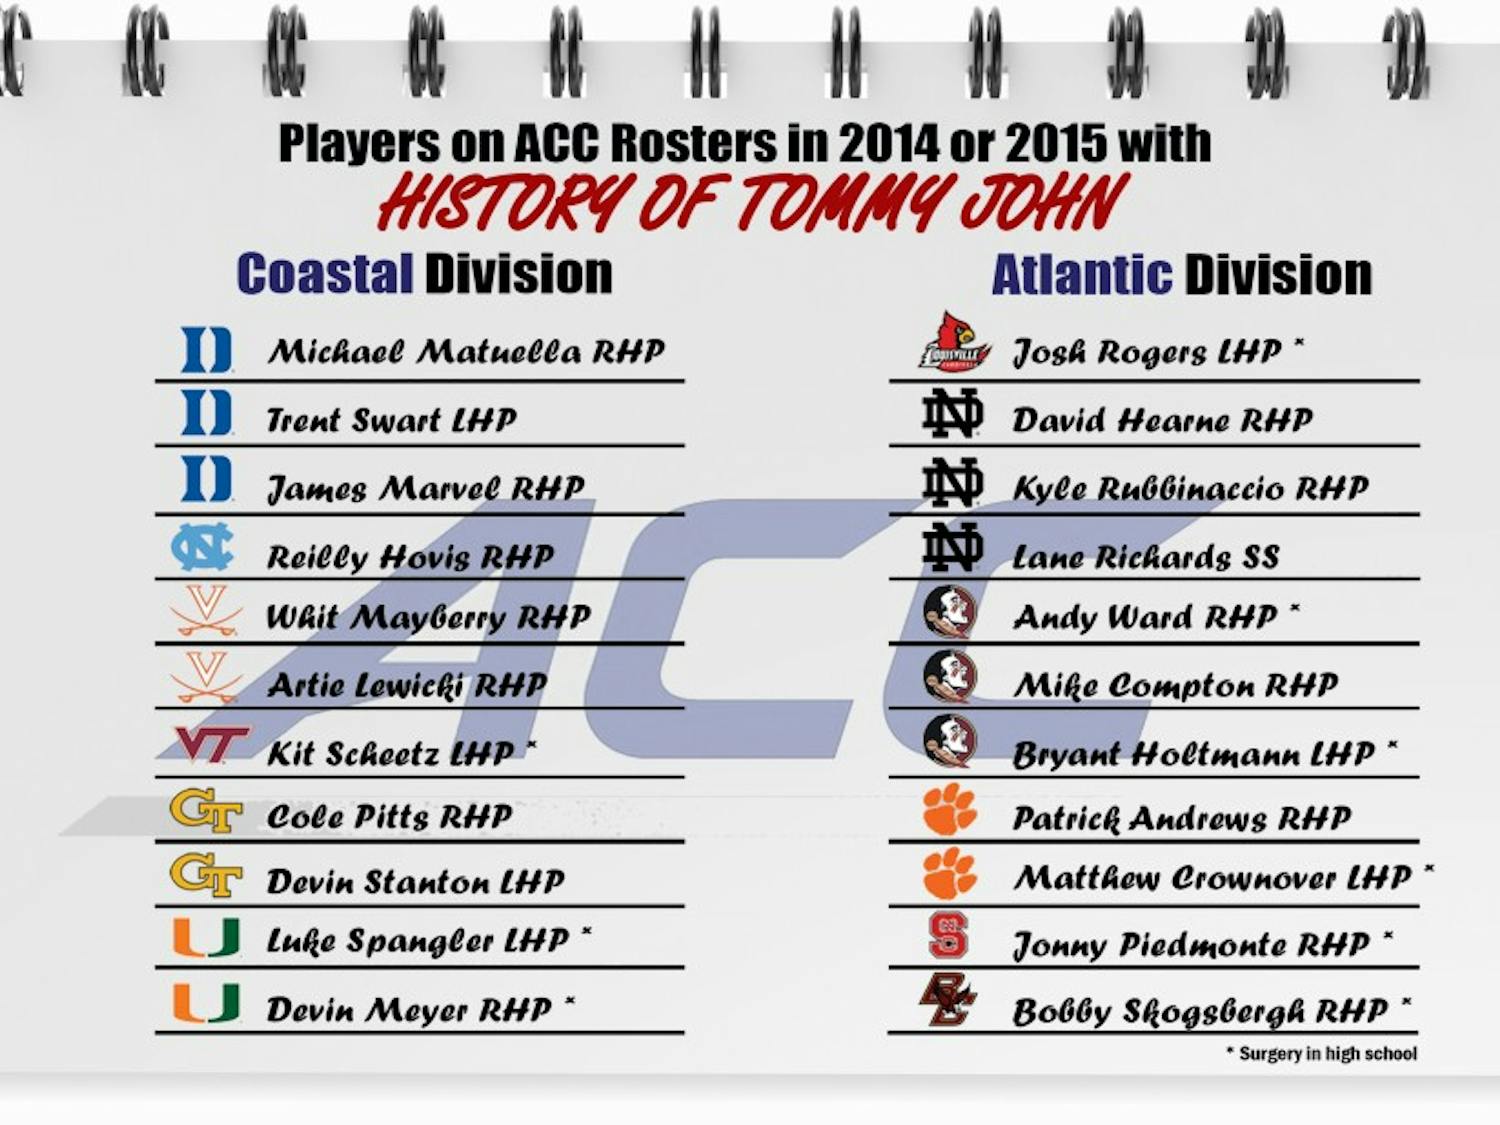 At least 22 players who were on ACC rosters in 2014 or 2015 had undergone Tommy John surgery during their career.